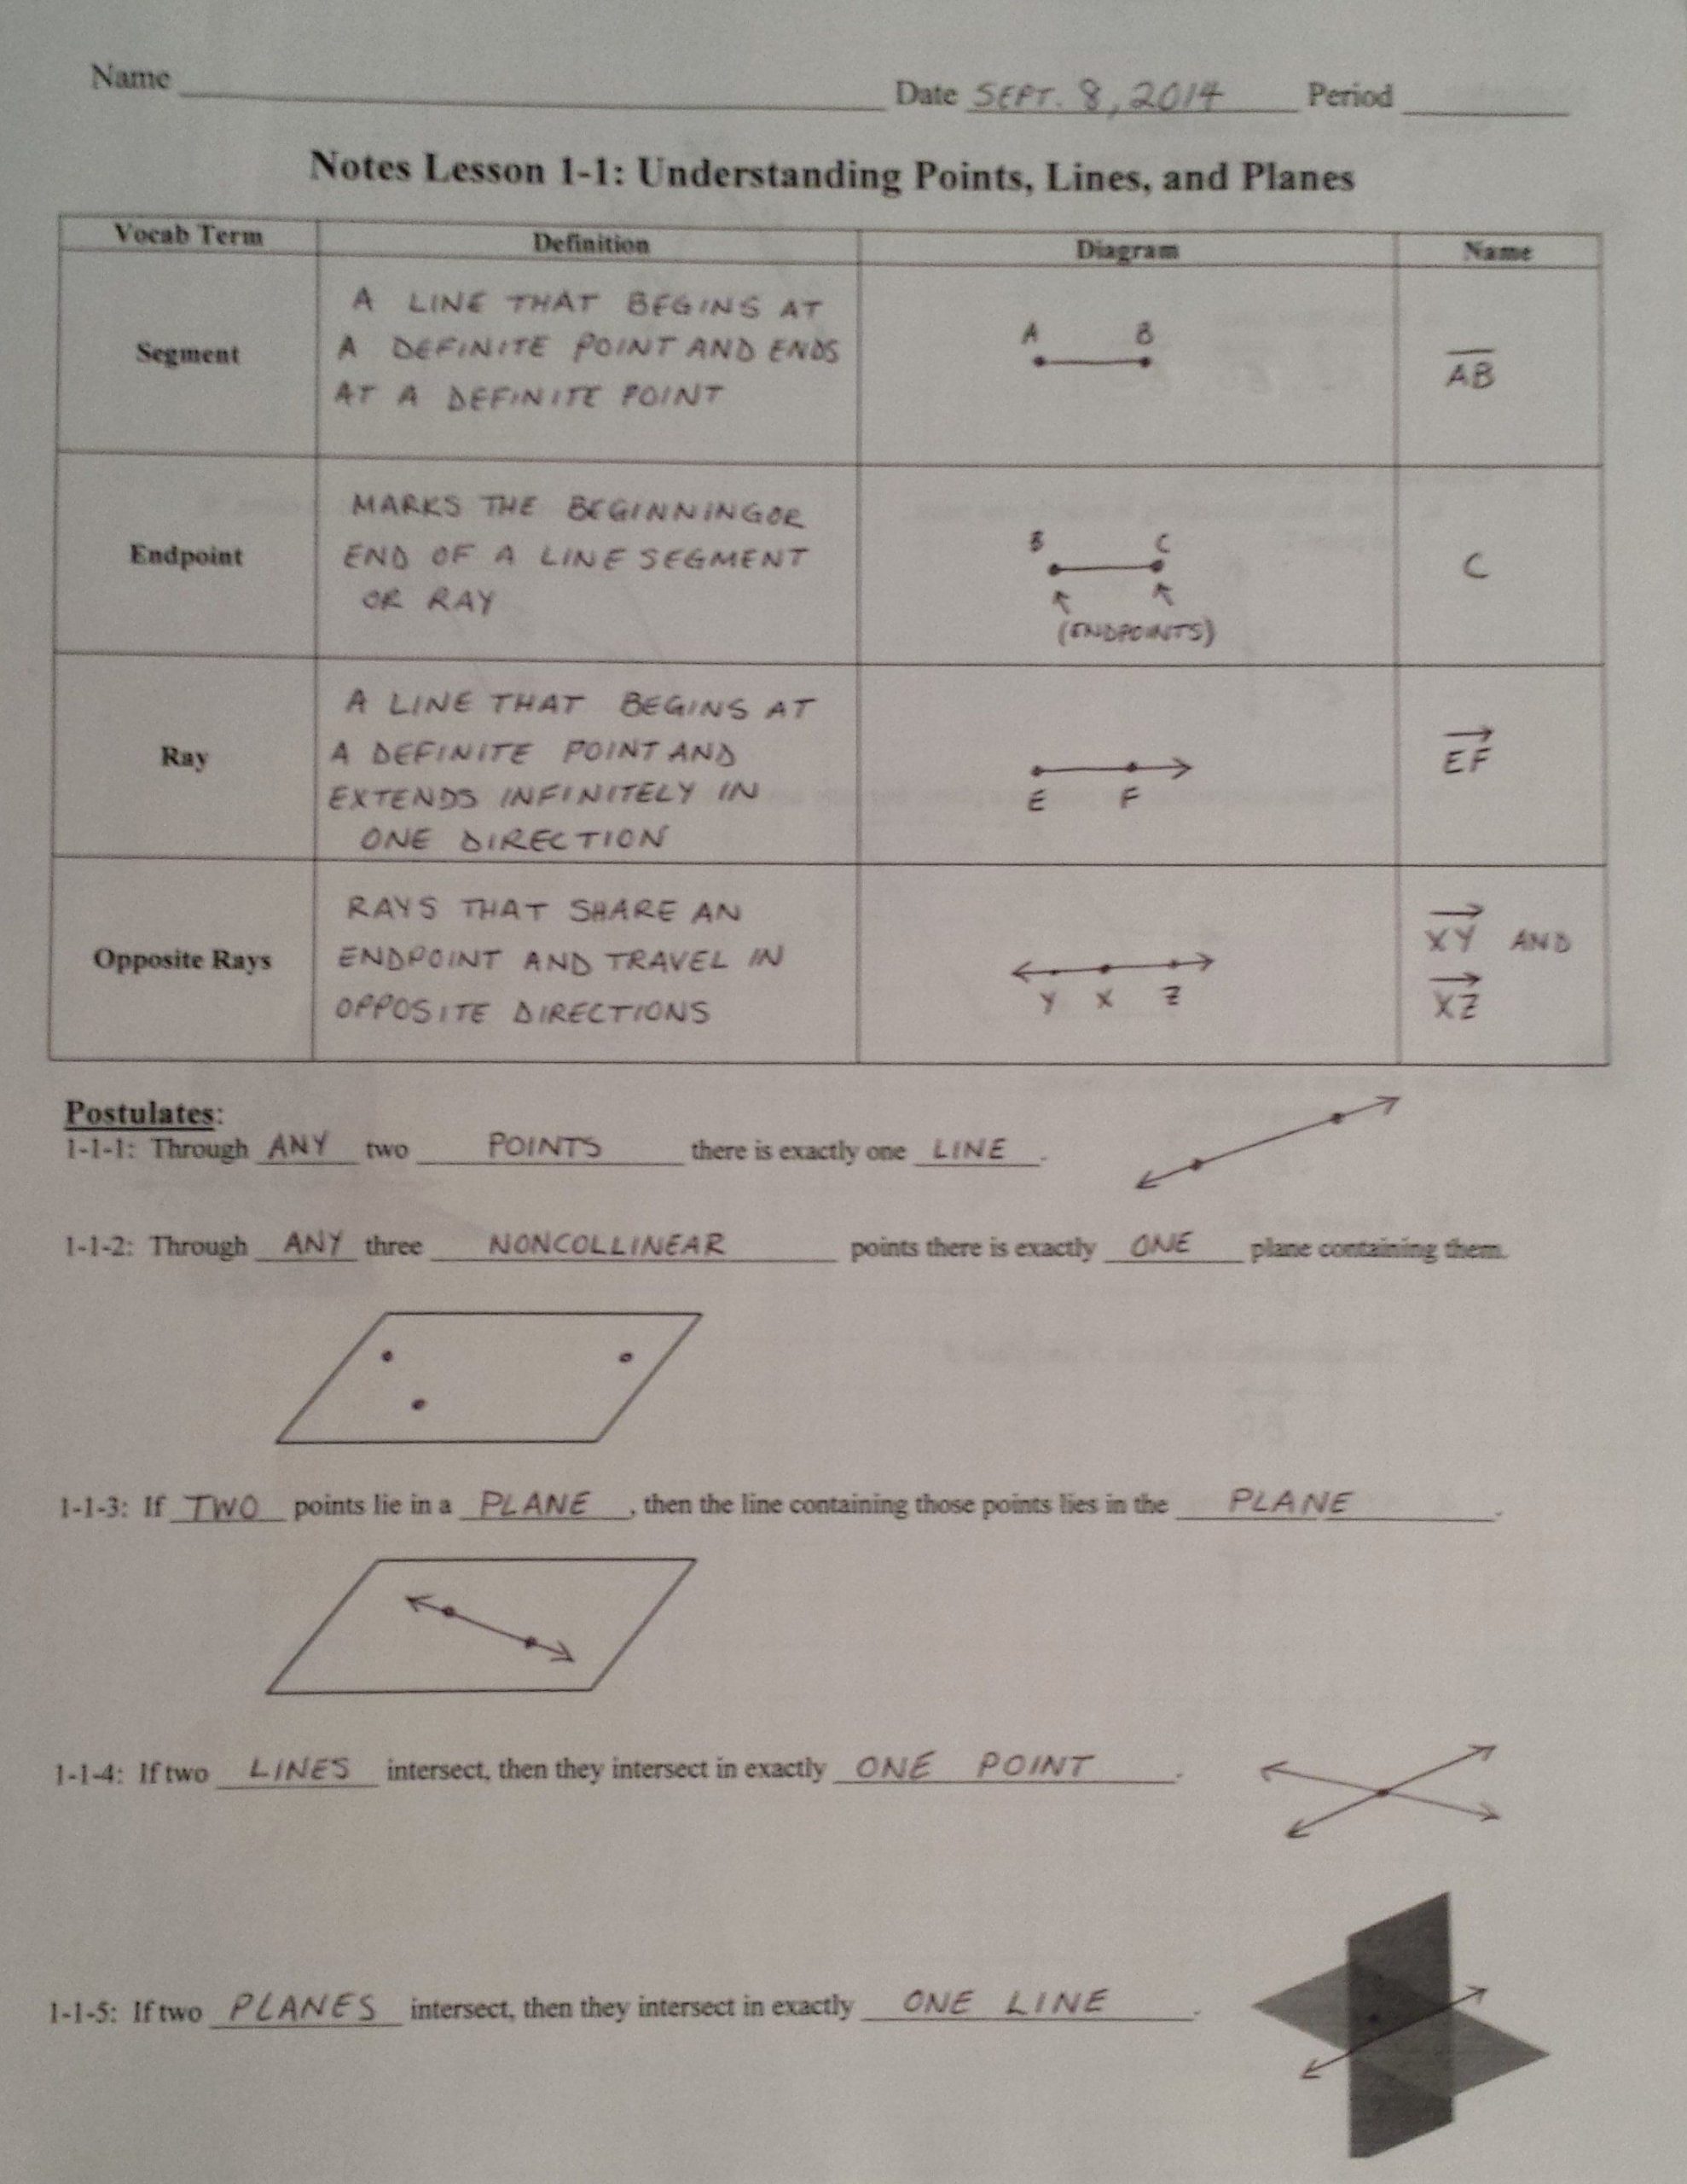 1-2 Points Lines And Planes Worksheet Answers